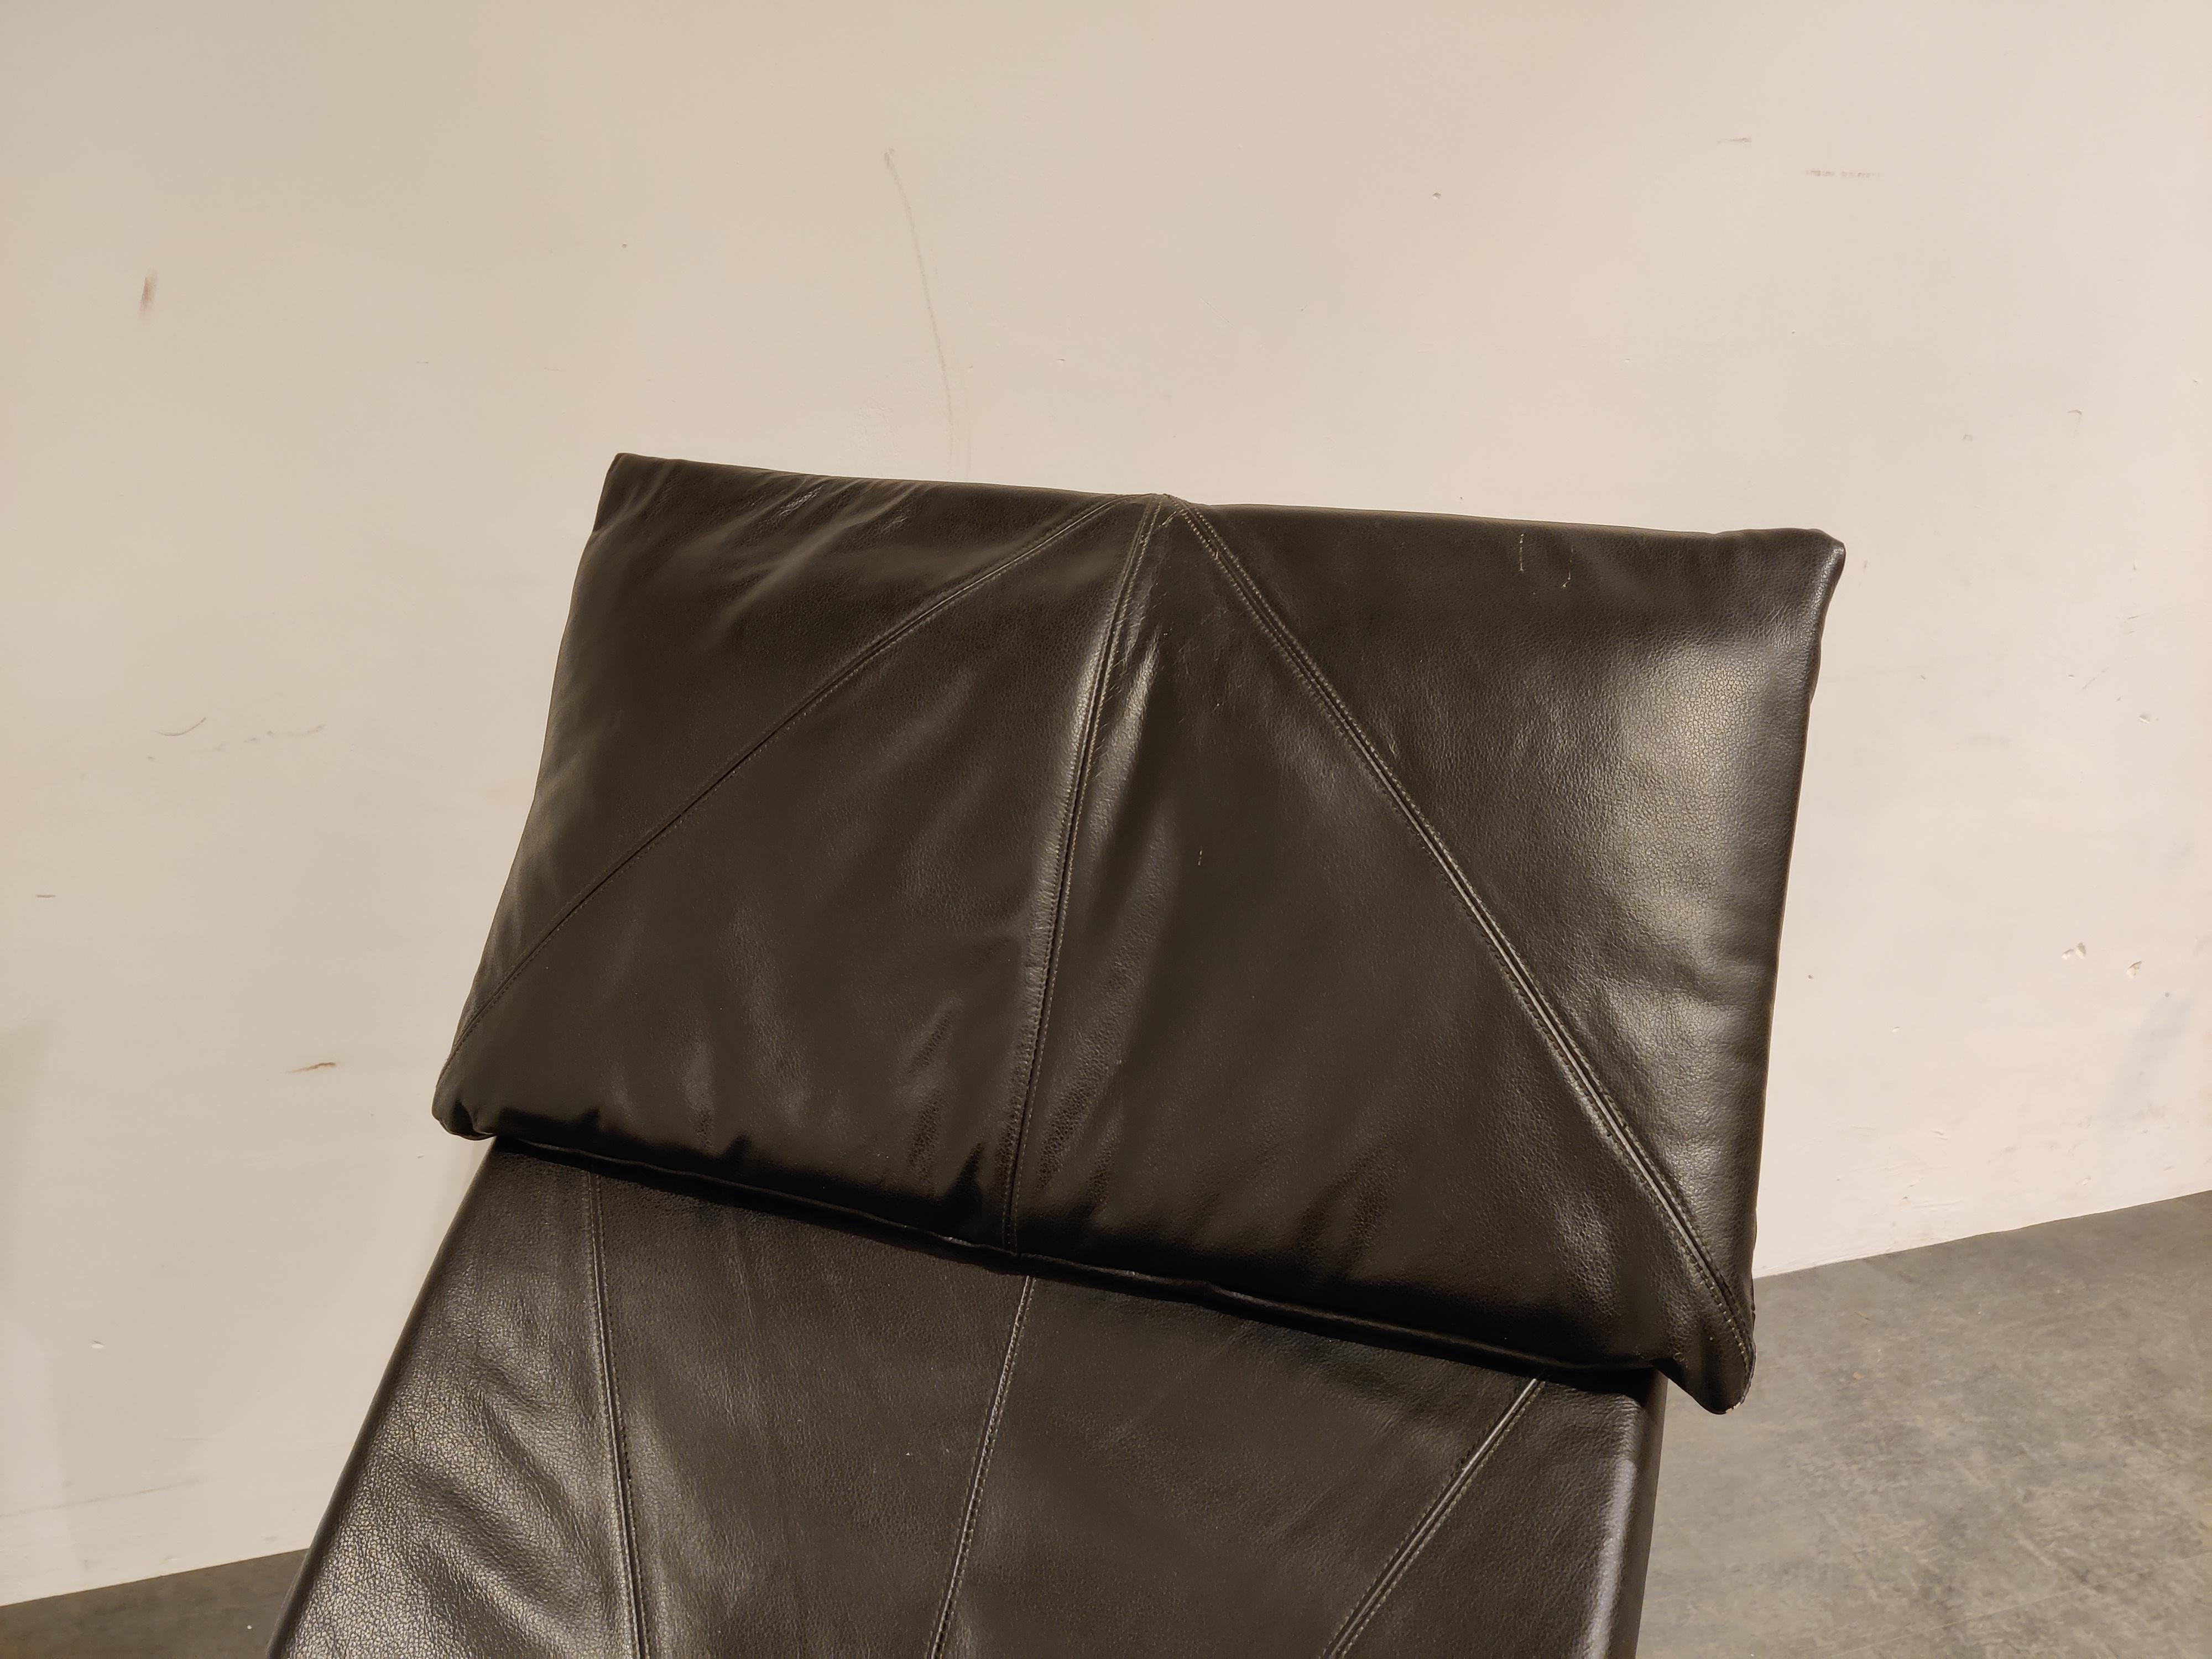 Vintage 'chaise longue' model 'skye' designed by Tord Björklund for Ikea in the 1980s.

The chair is amazingly comfortable and is in very good condition, barely used.

Nice thick leather cushions and chromed frame.

1980s -